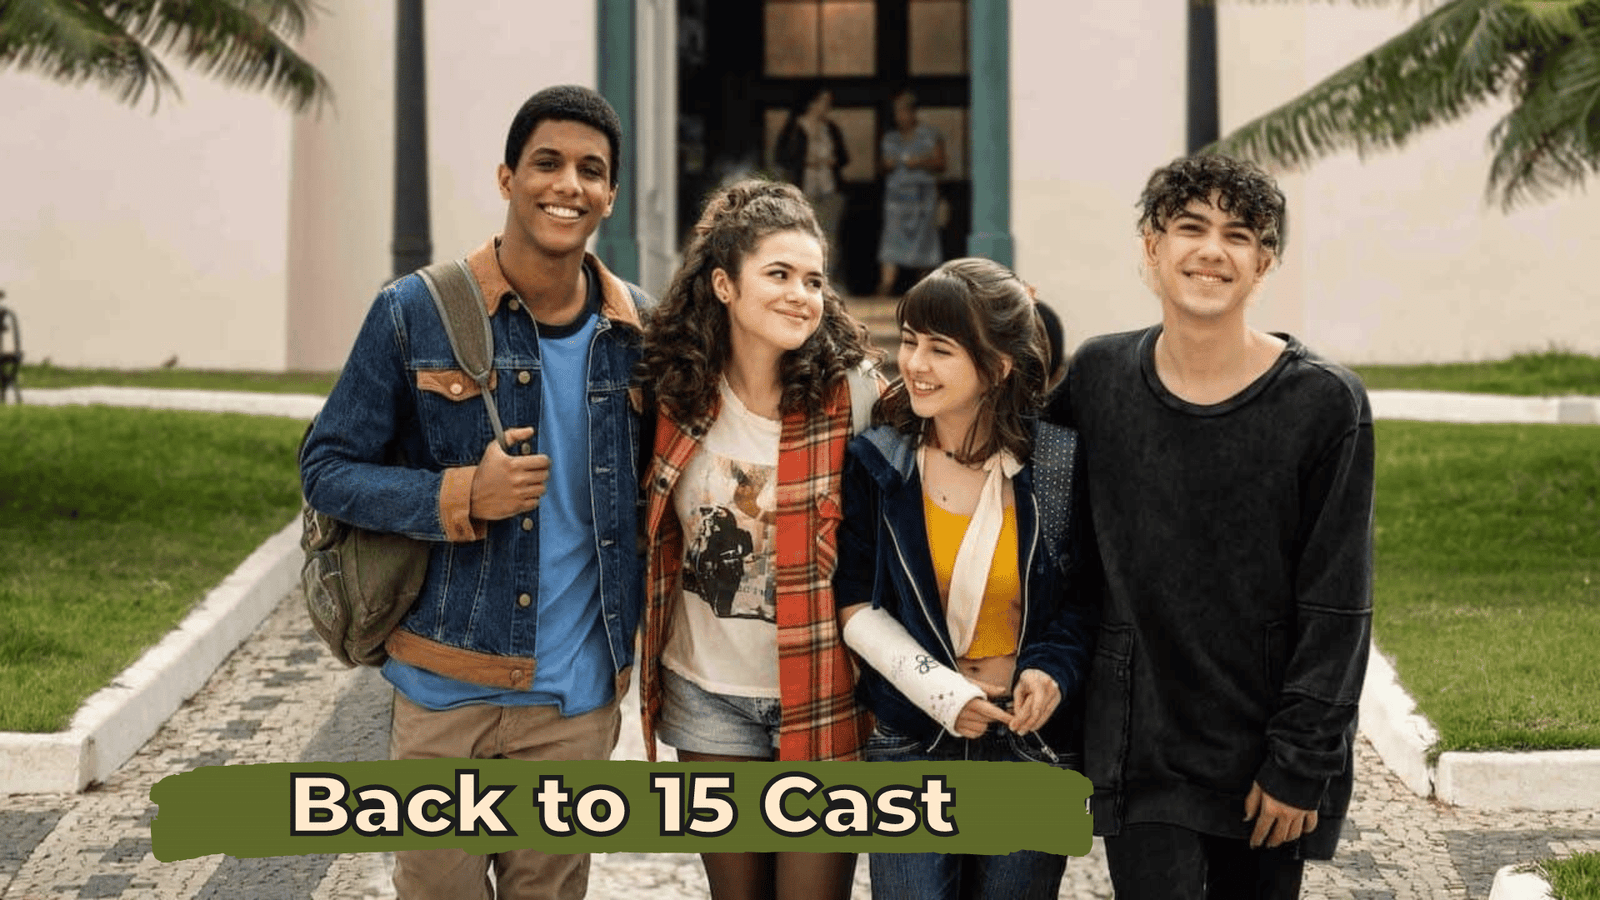 Back to 15 Cast - Ages, Partners, Characters